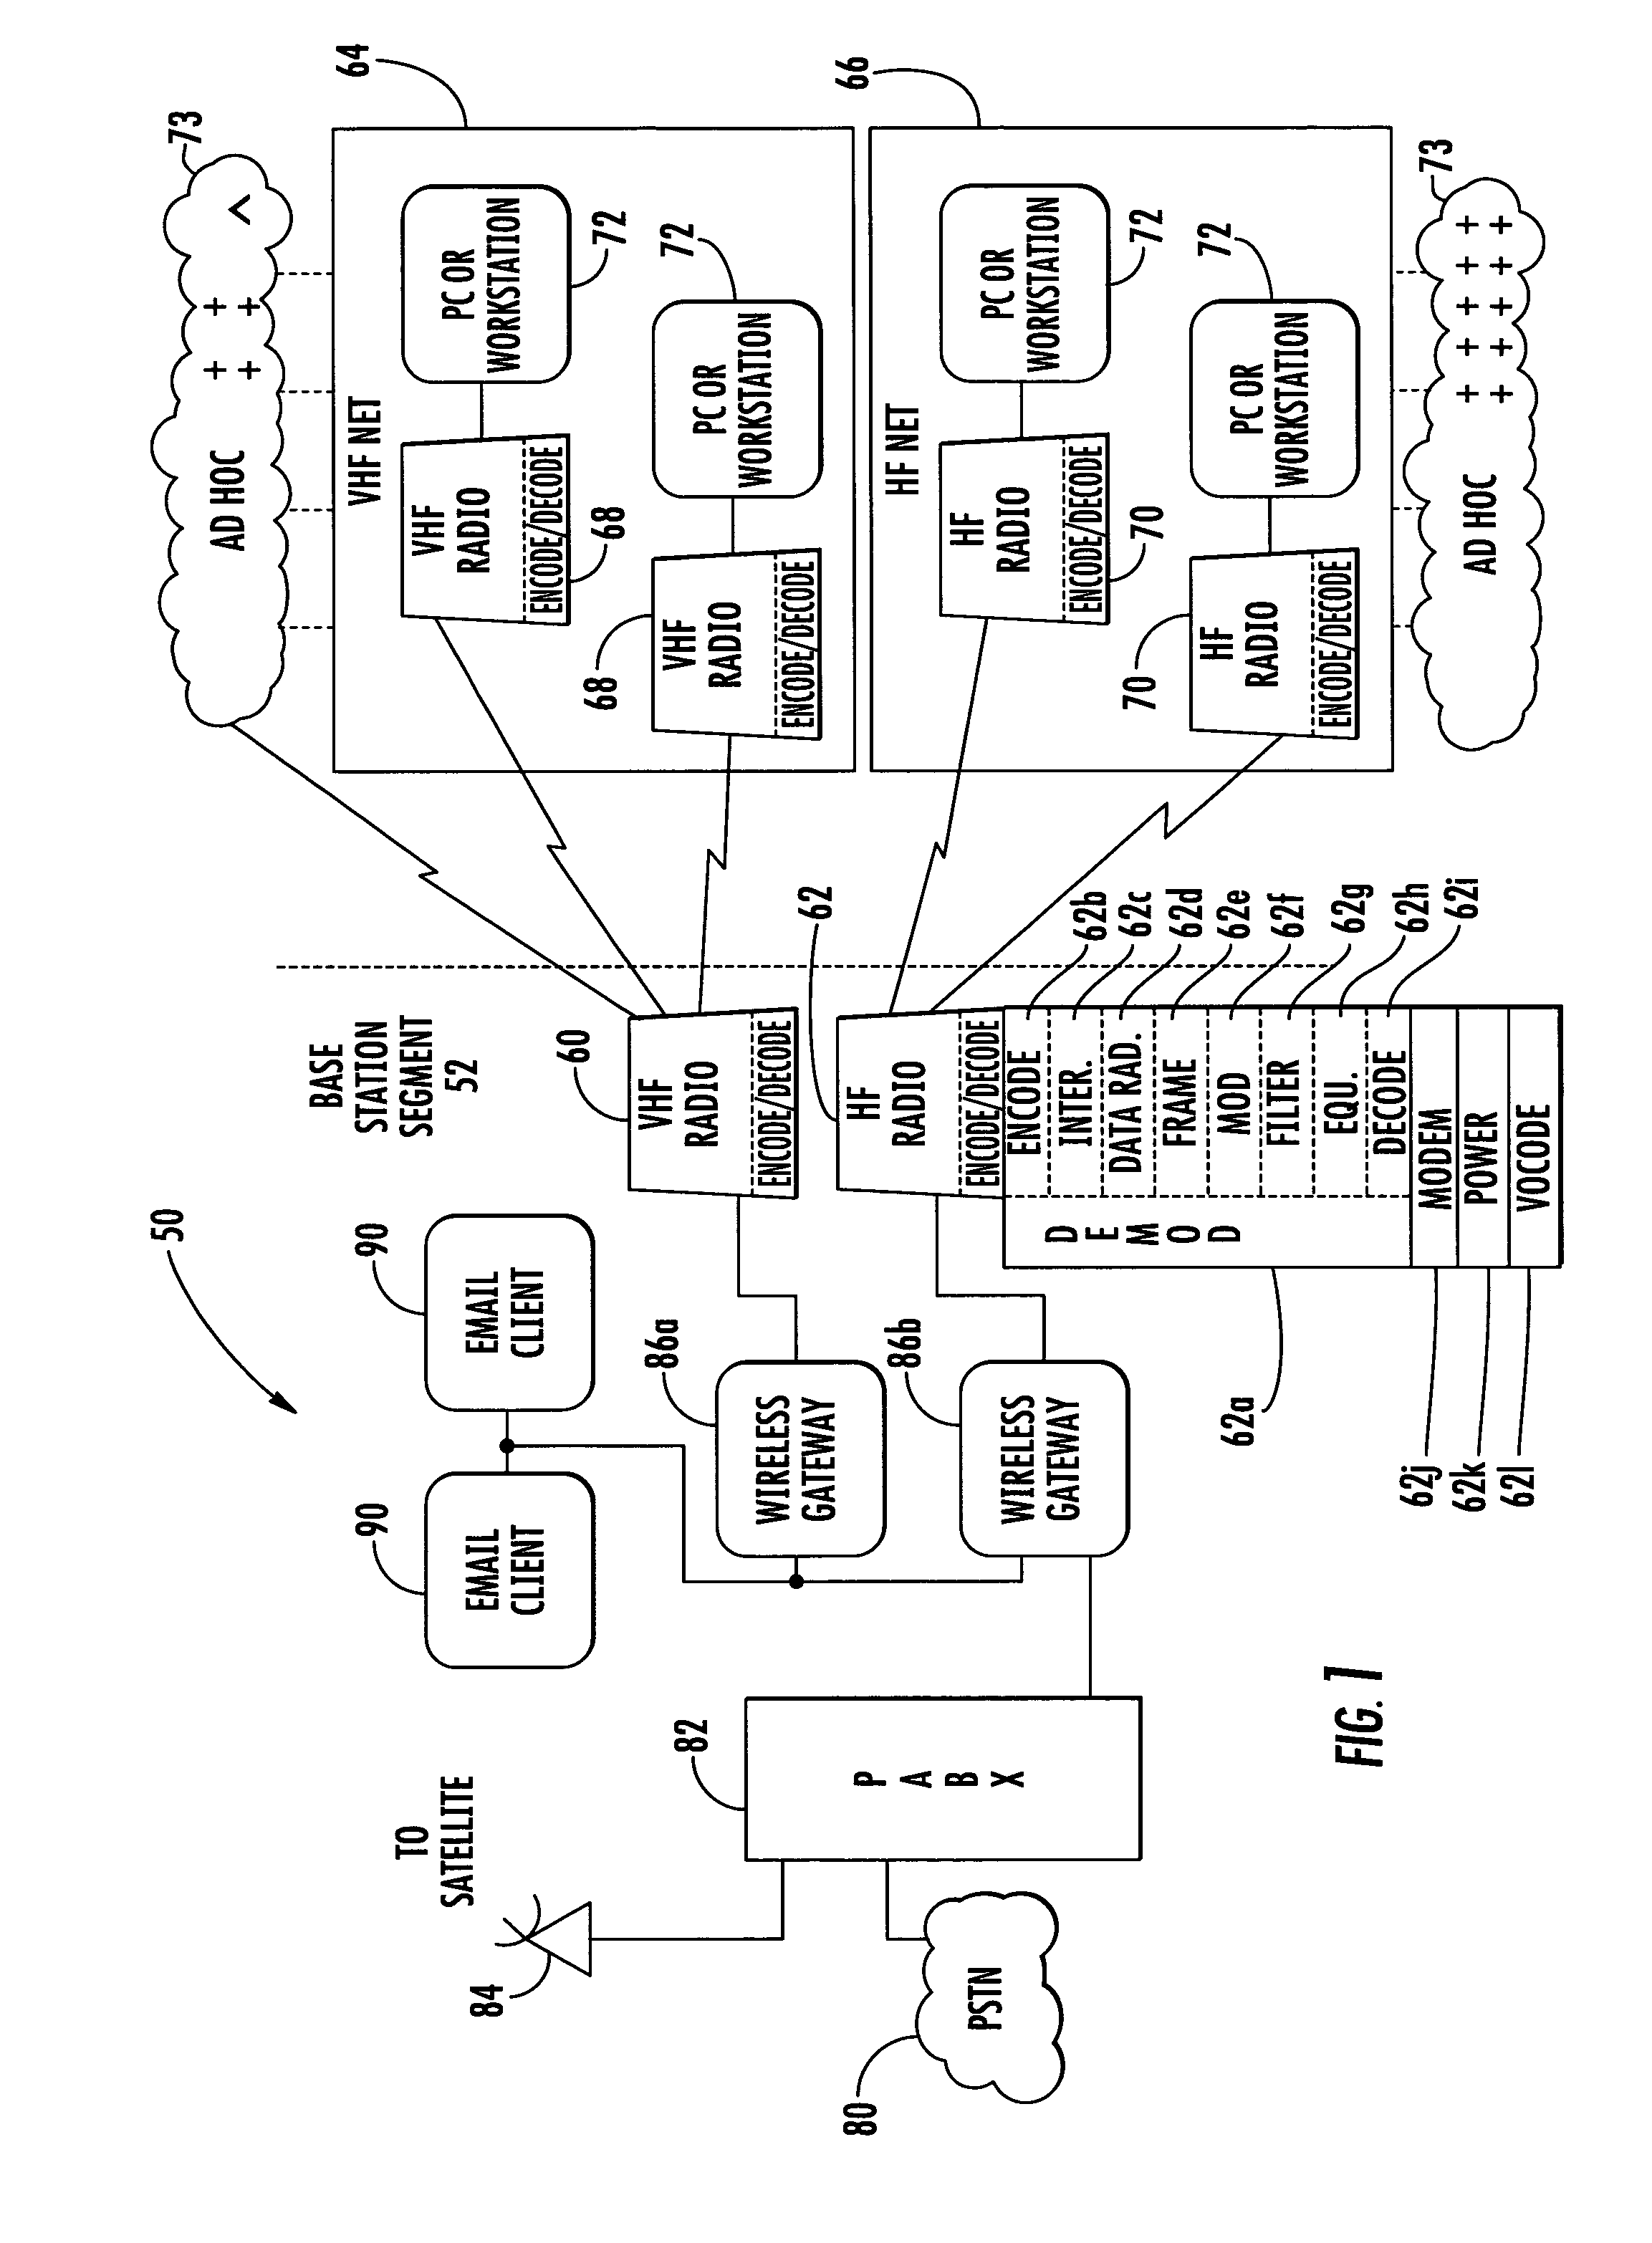 System and method for communicating over mesh networks using waveform-enhanced, link-state routing